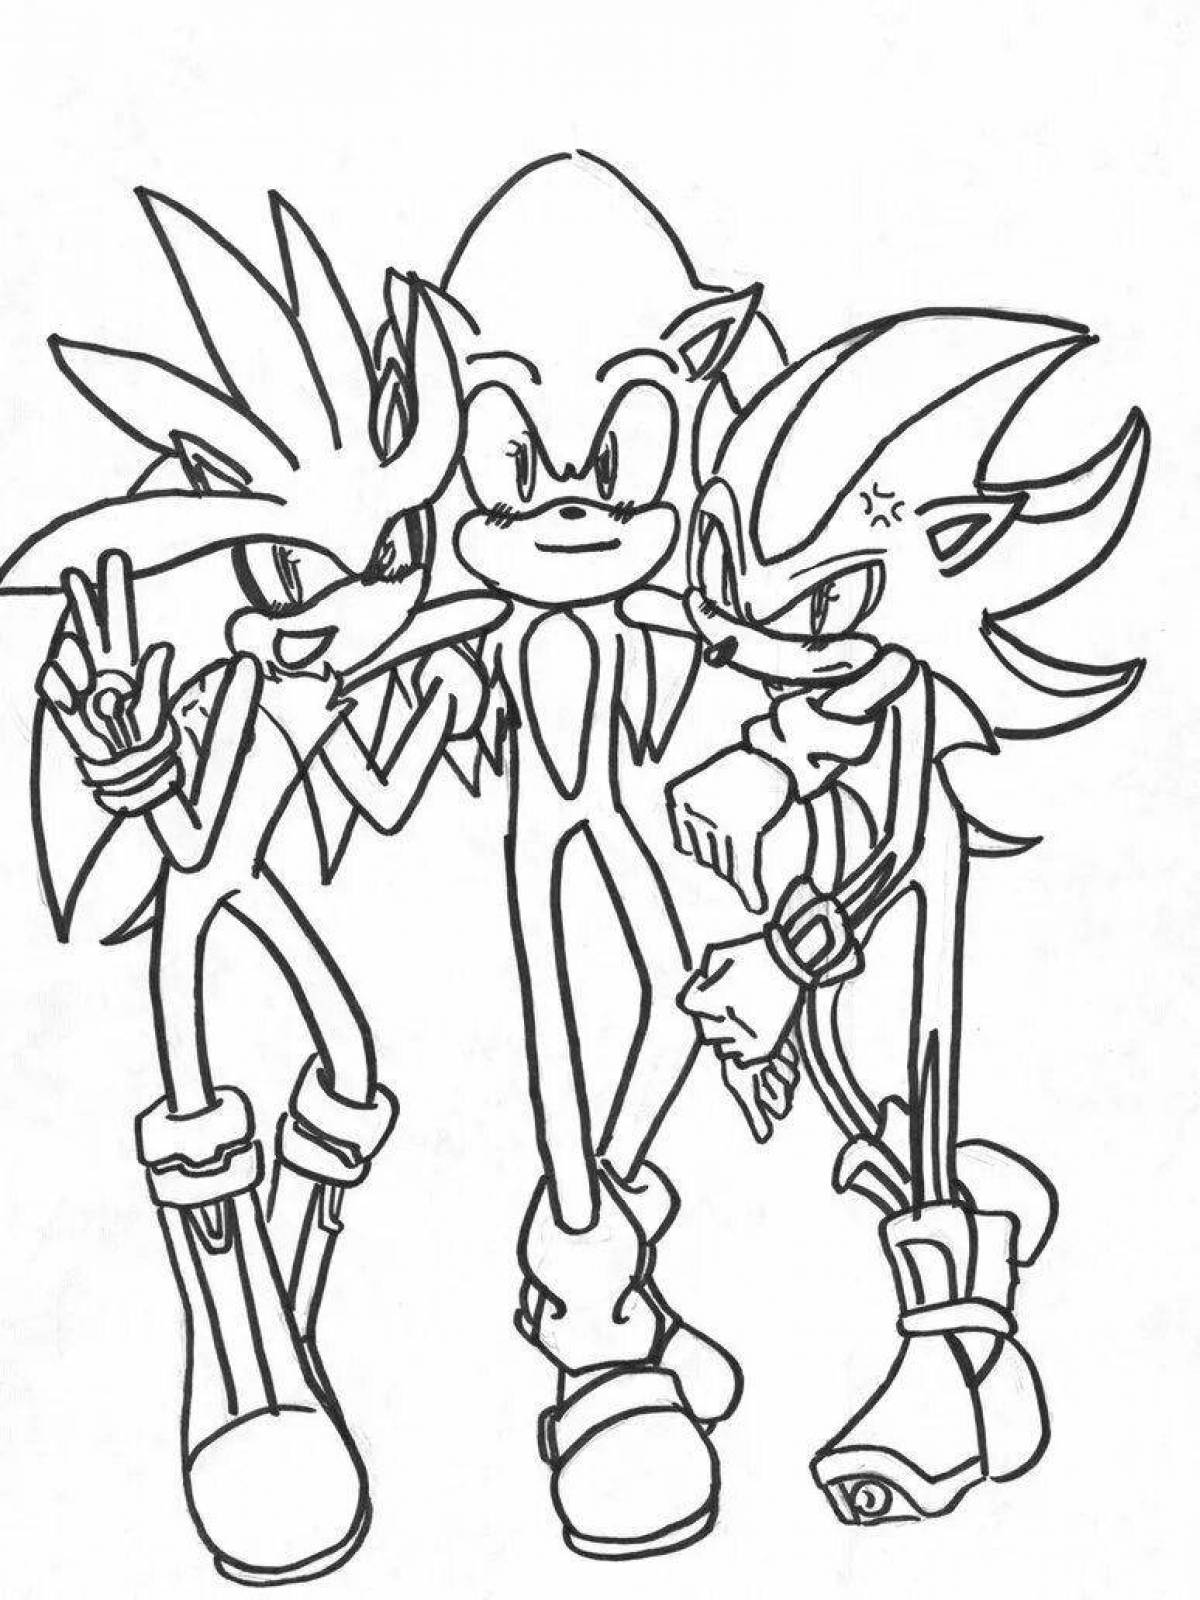 Lovely minecraft sonic coloring page